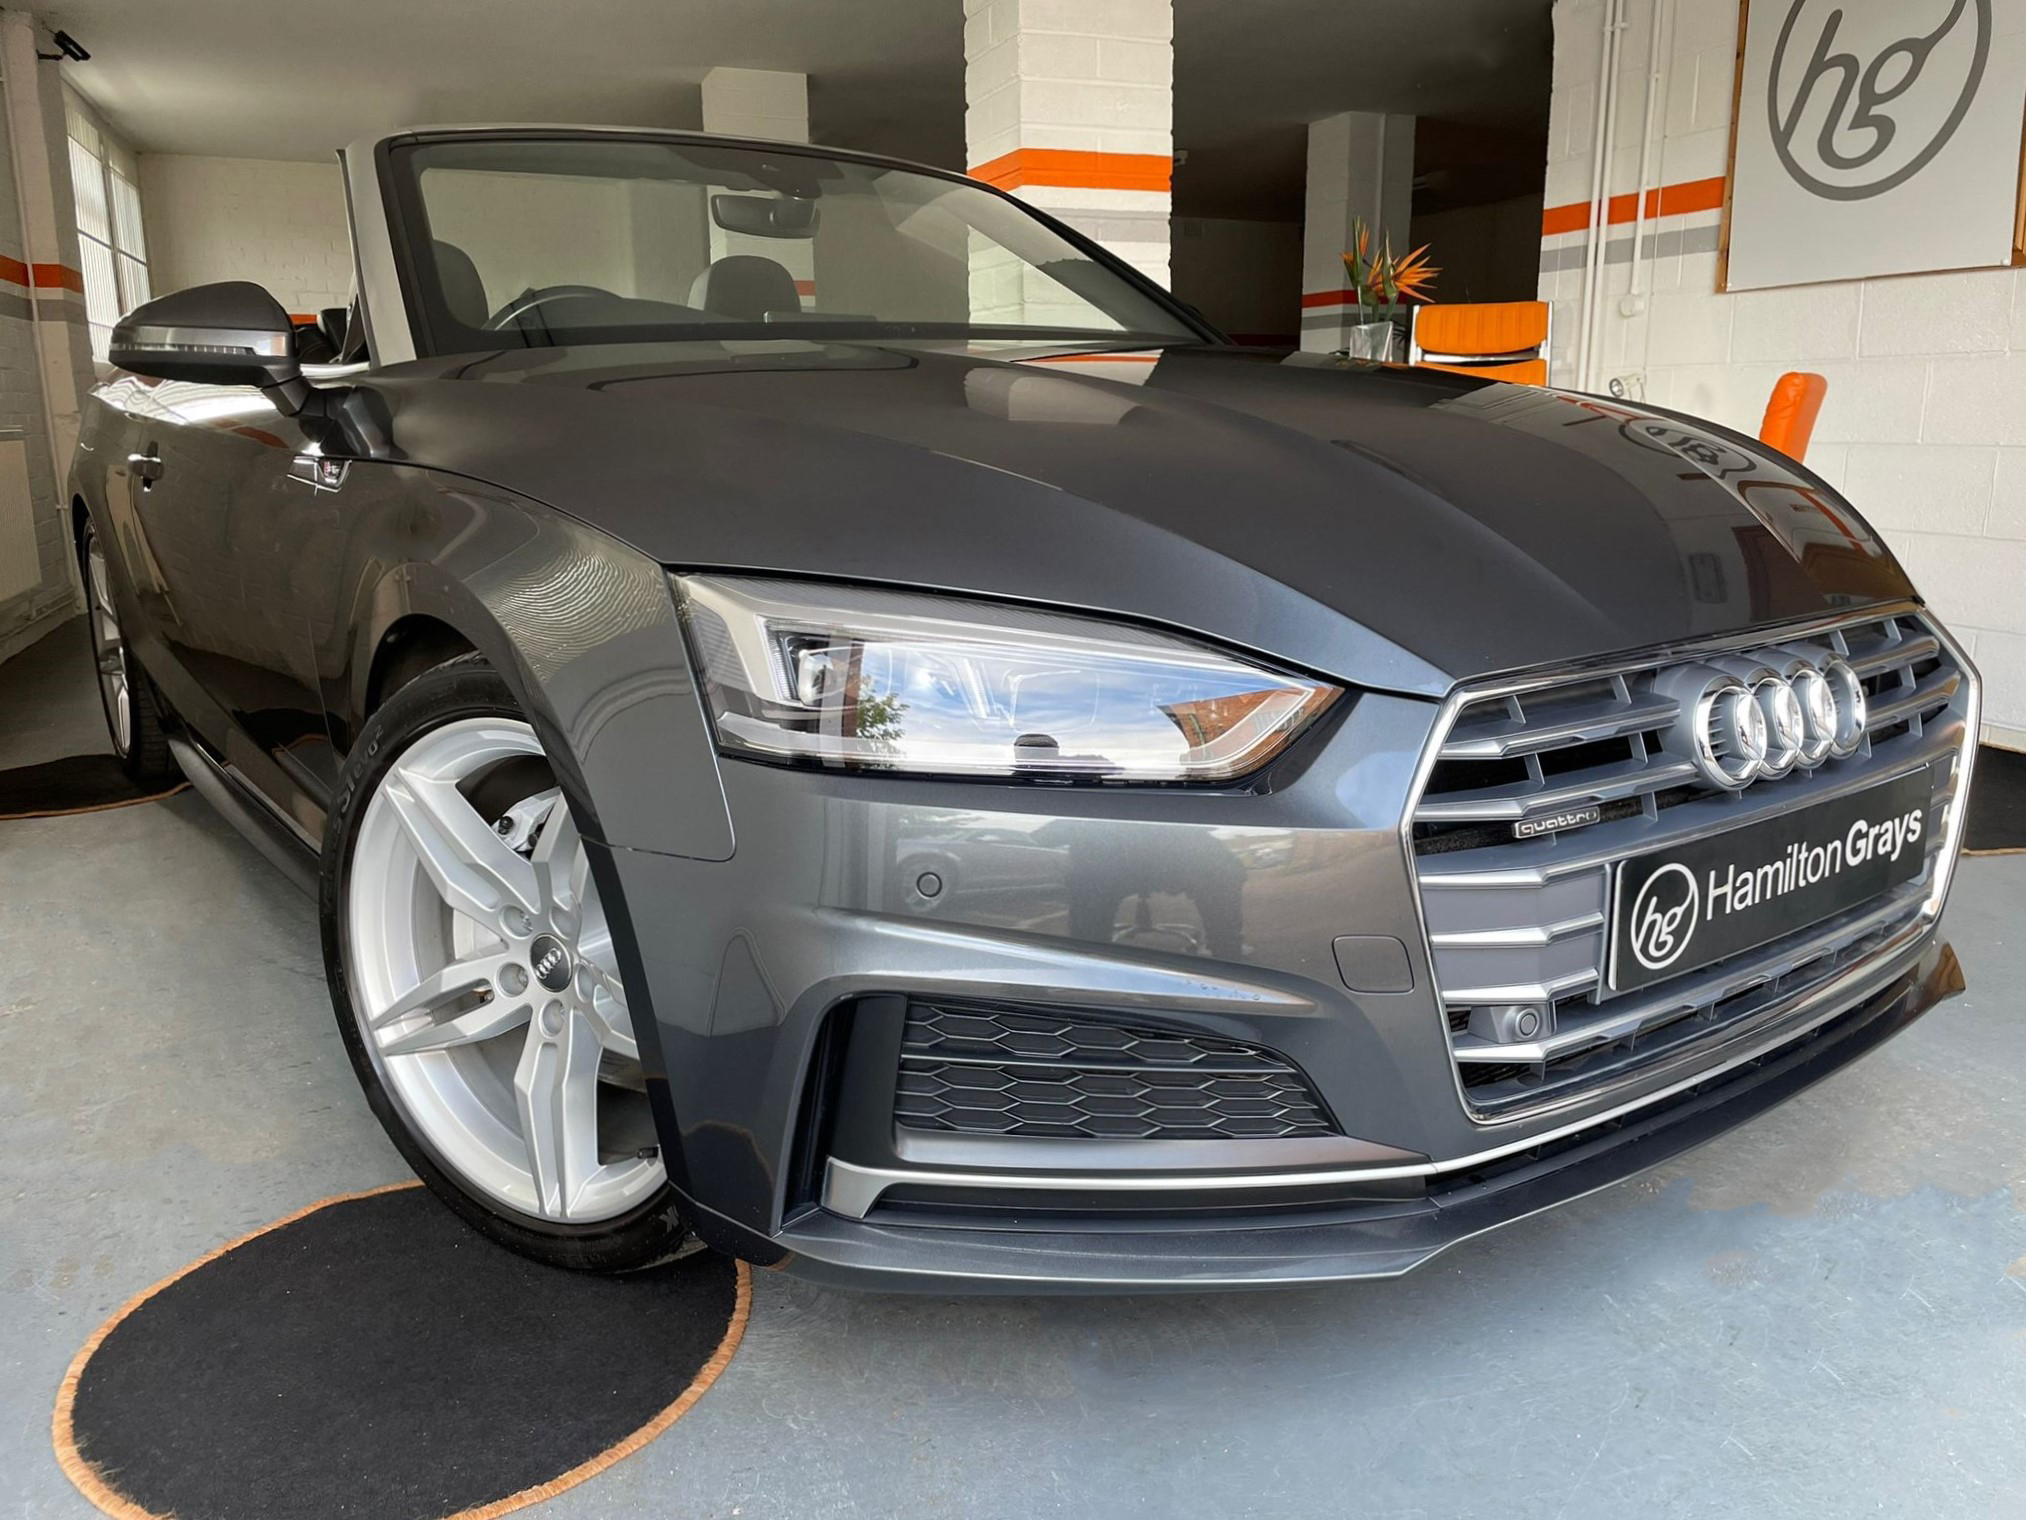 2020 (20) Audi A5 Cabriolet 2.0 TDI 40 S line STronic quattro. In Daytona Grey with Contrasting Black Folding Roof. Alcantara / Leather Black Upholstery. FASH.. 26k. 1 Owner Car. £34,950